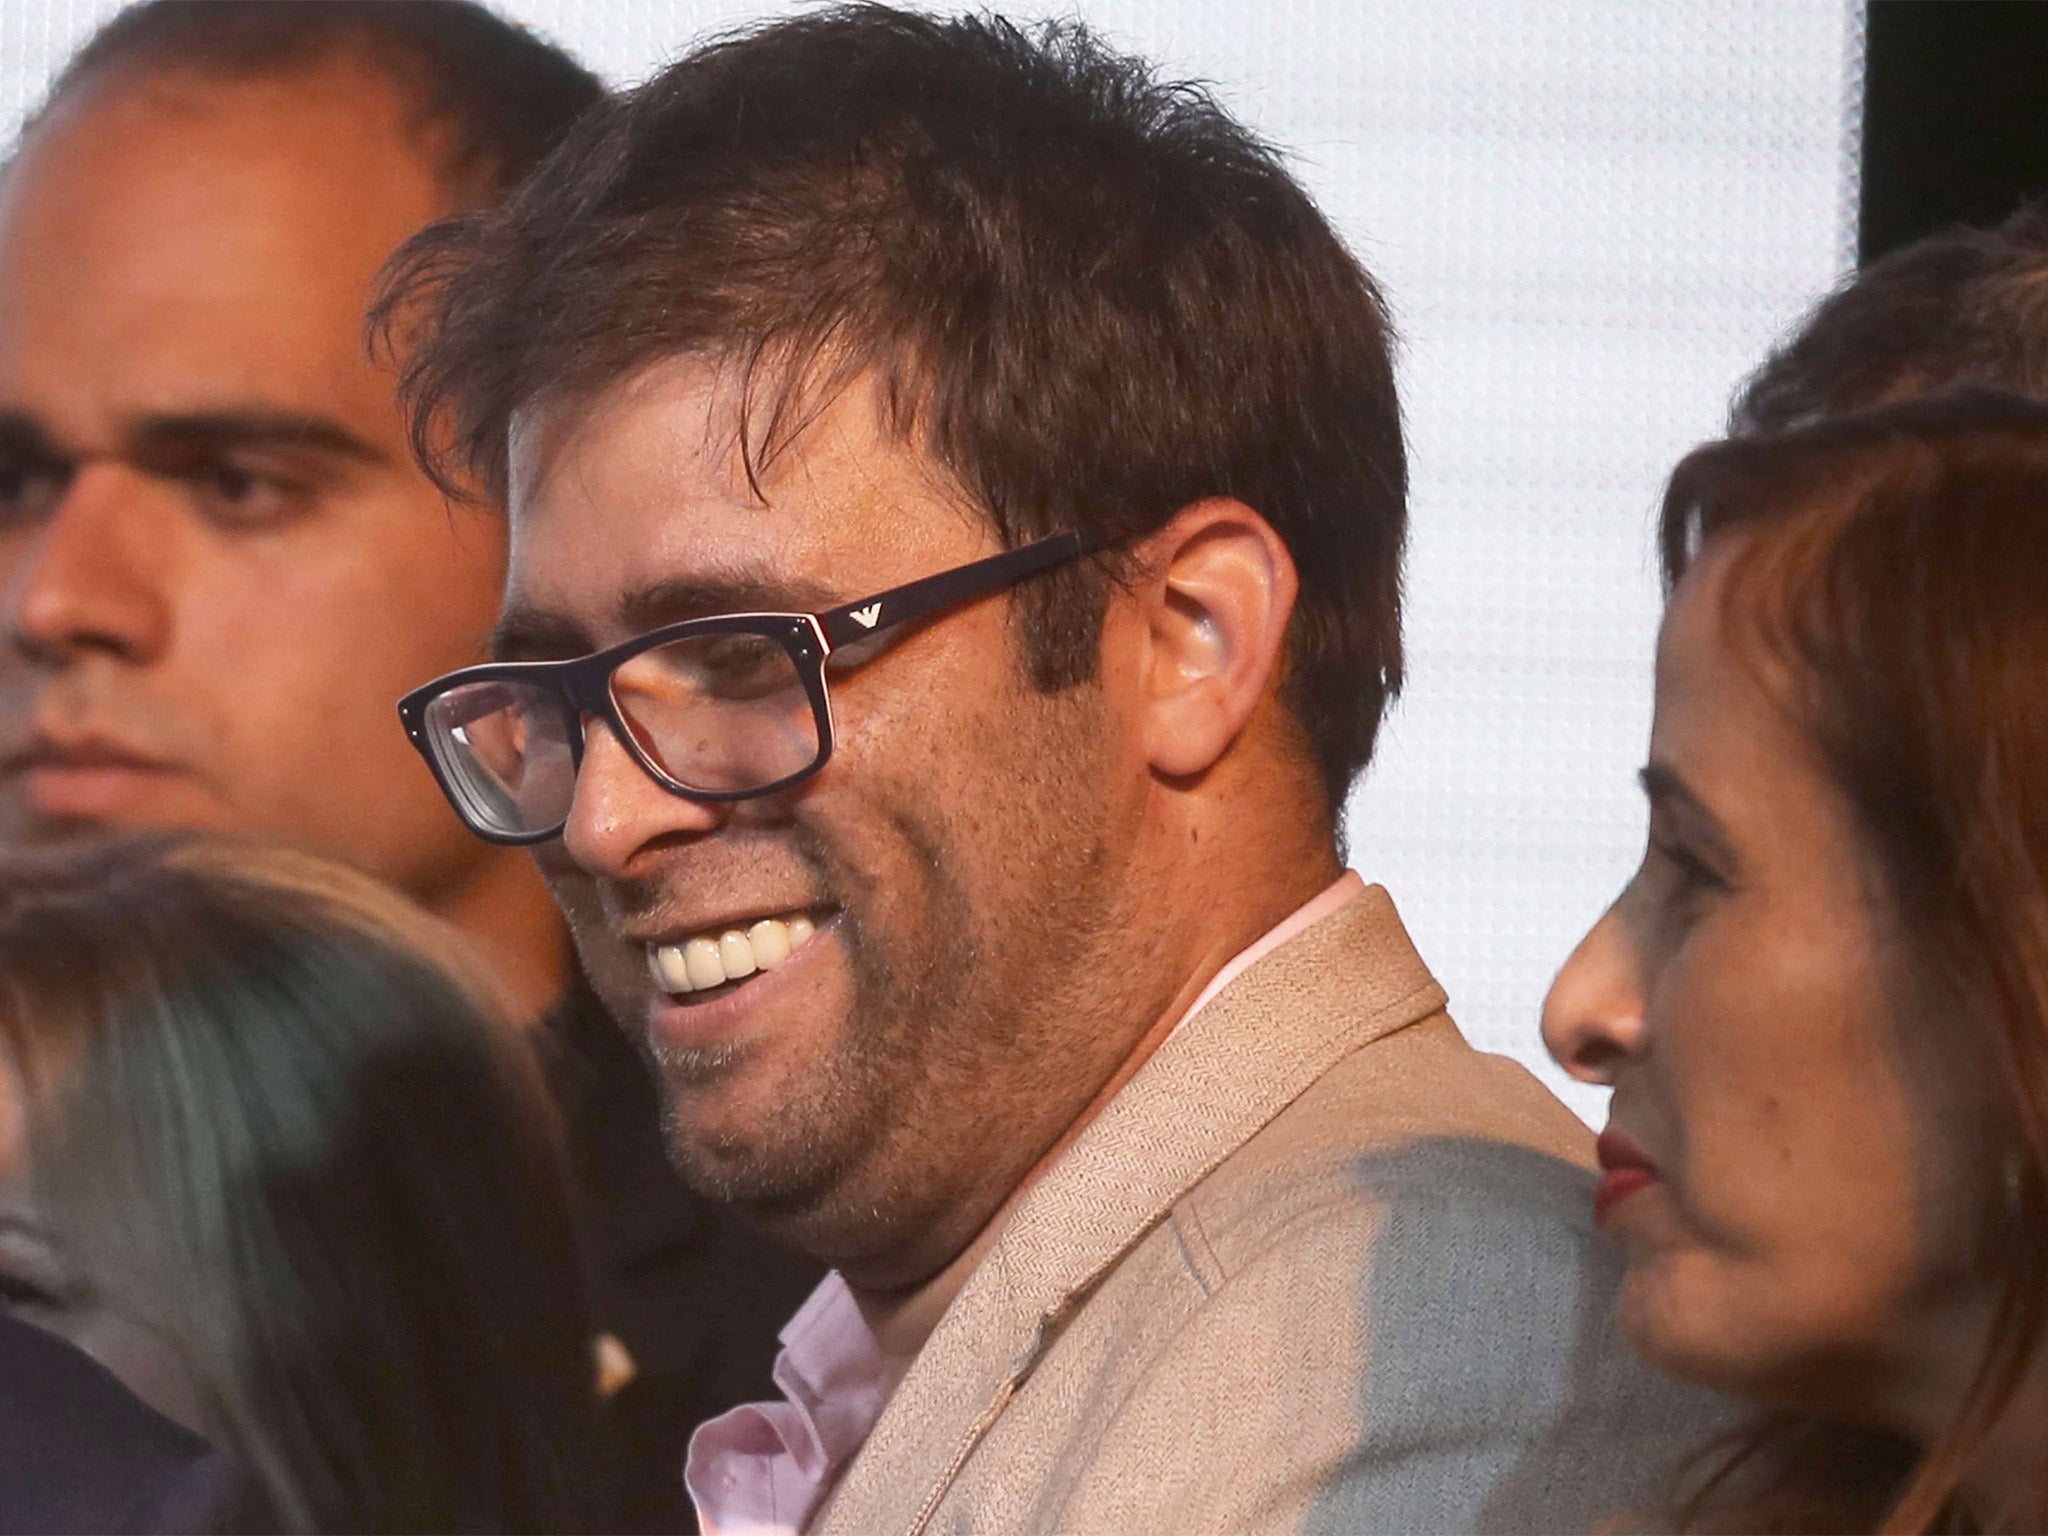 Oren Hazan has been barred indefinitely from chairing a Knesset session as deputy speaker